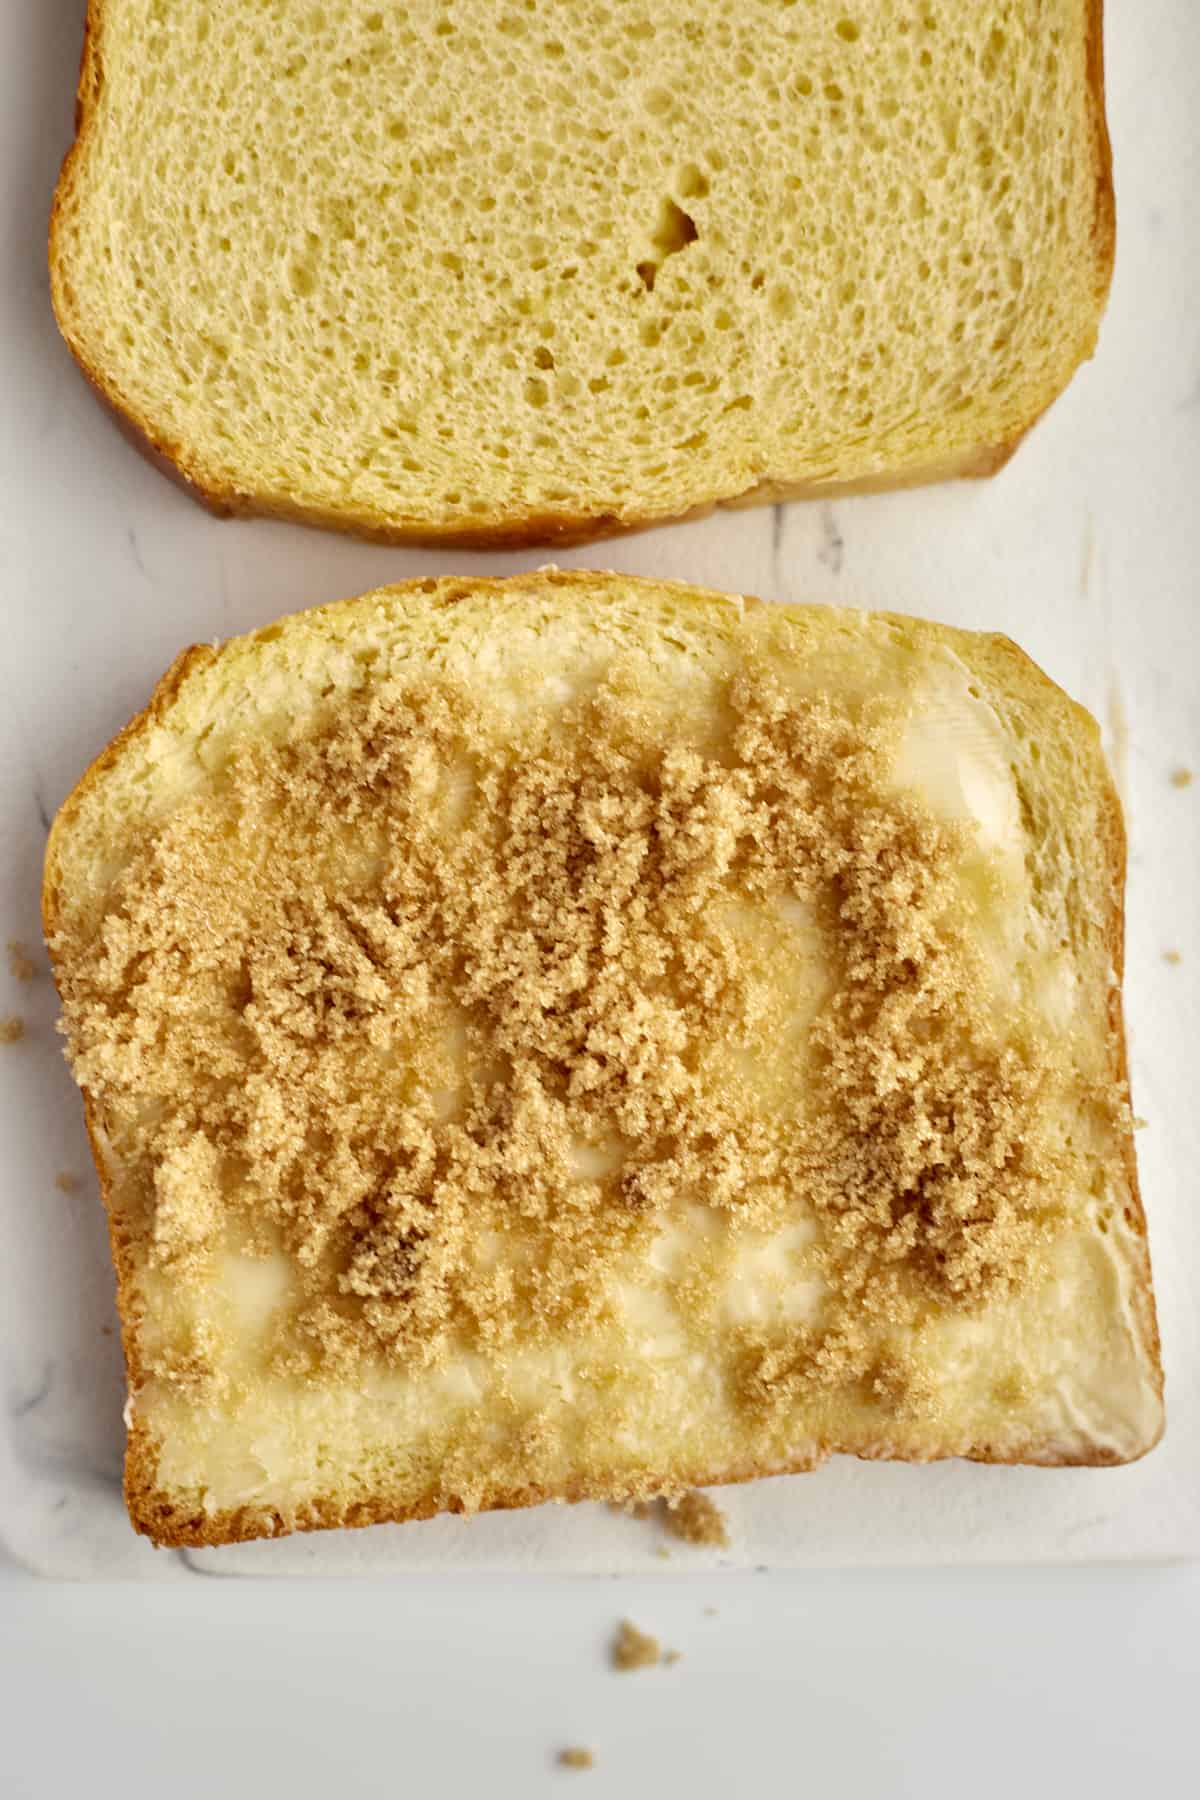 two slices of brioche bread, one buttered and topped with brown sugar